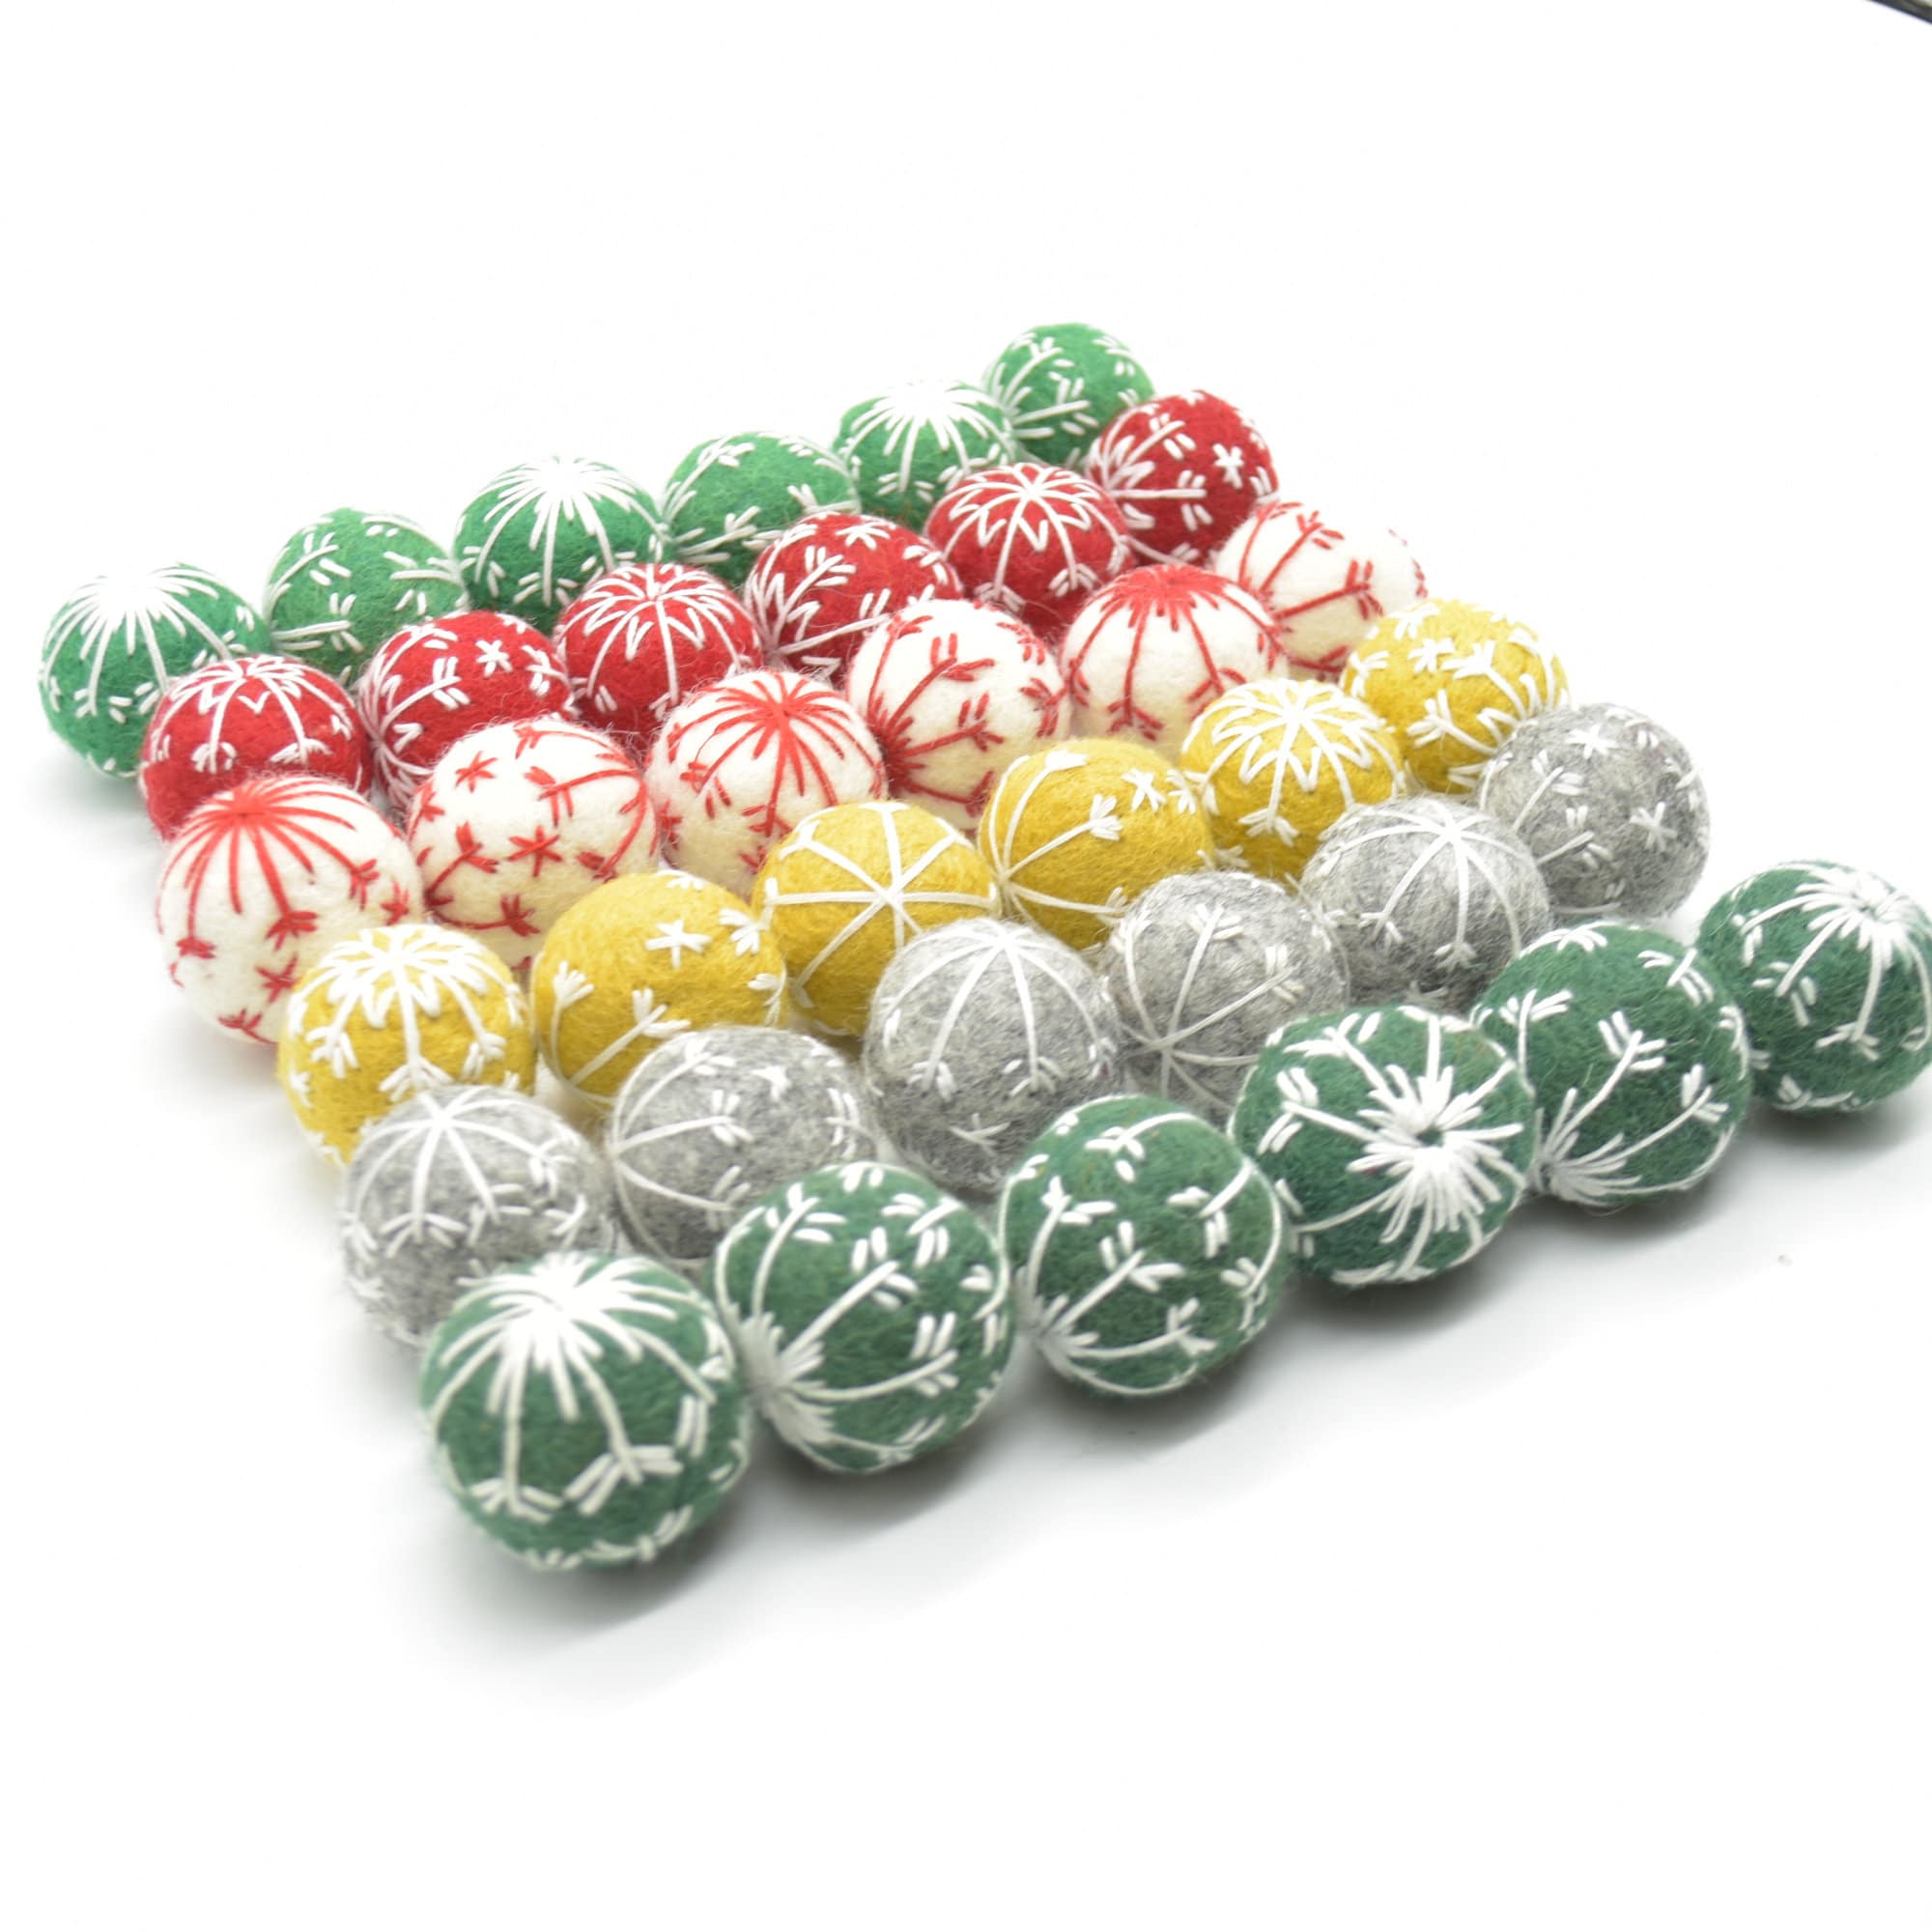 Polka Dot and Candycane Color Style Ornament Ball Bundle, Set of 24 Red and  White Patterned Christmas Baubles